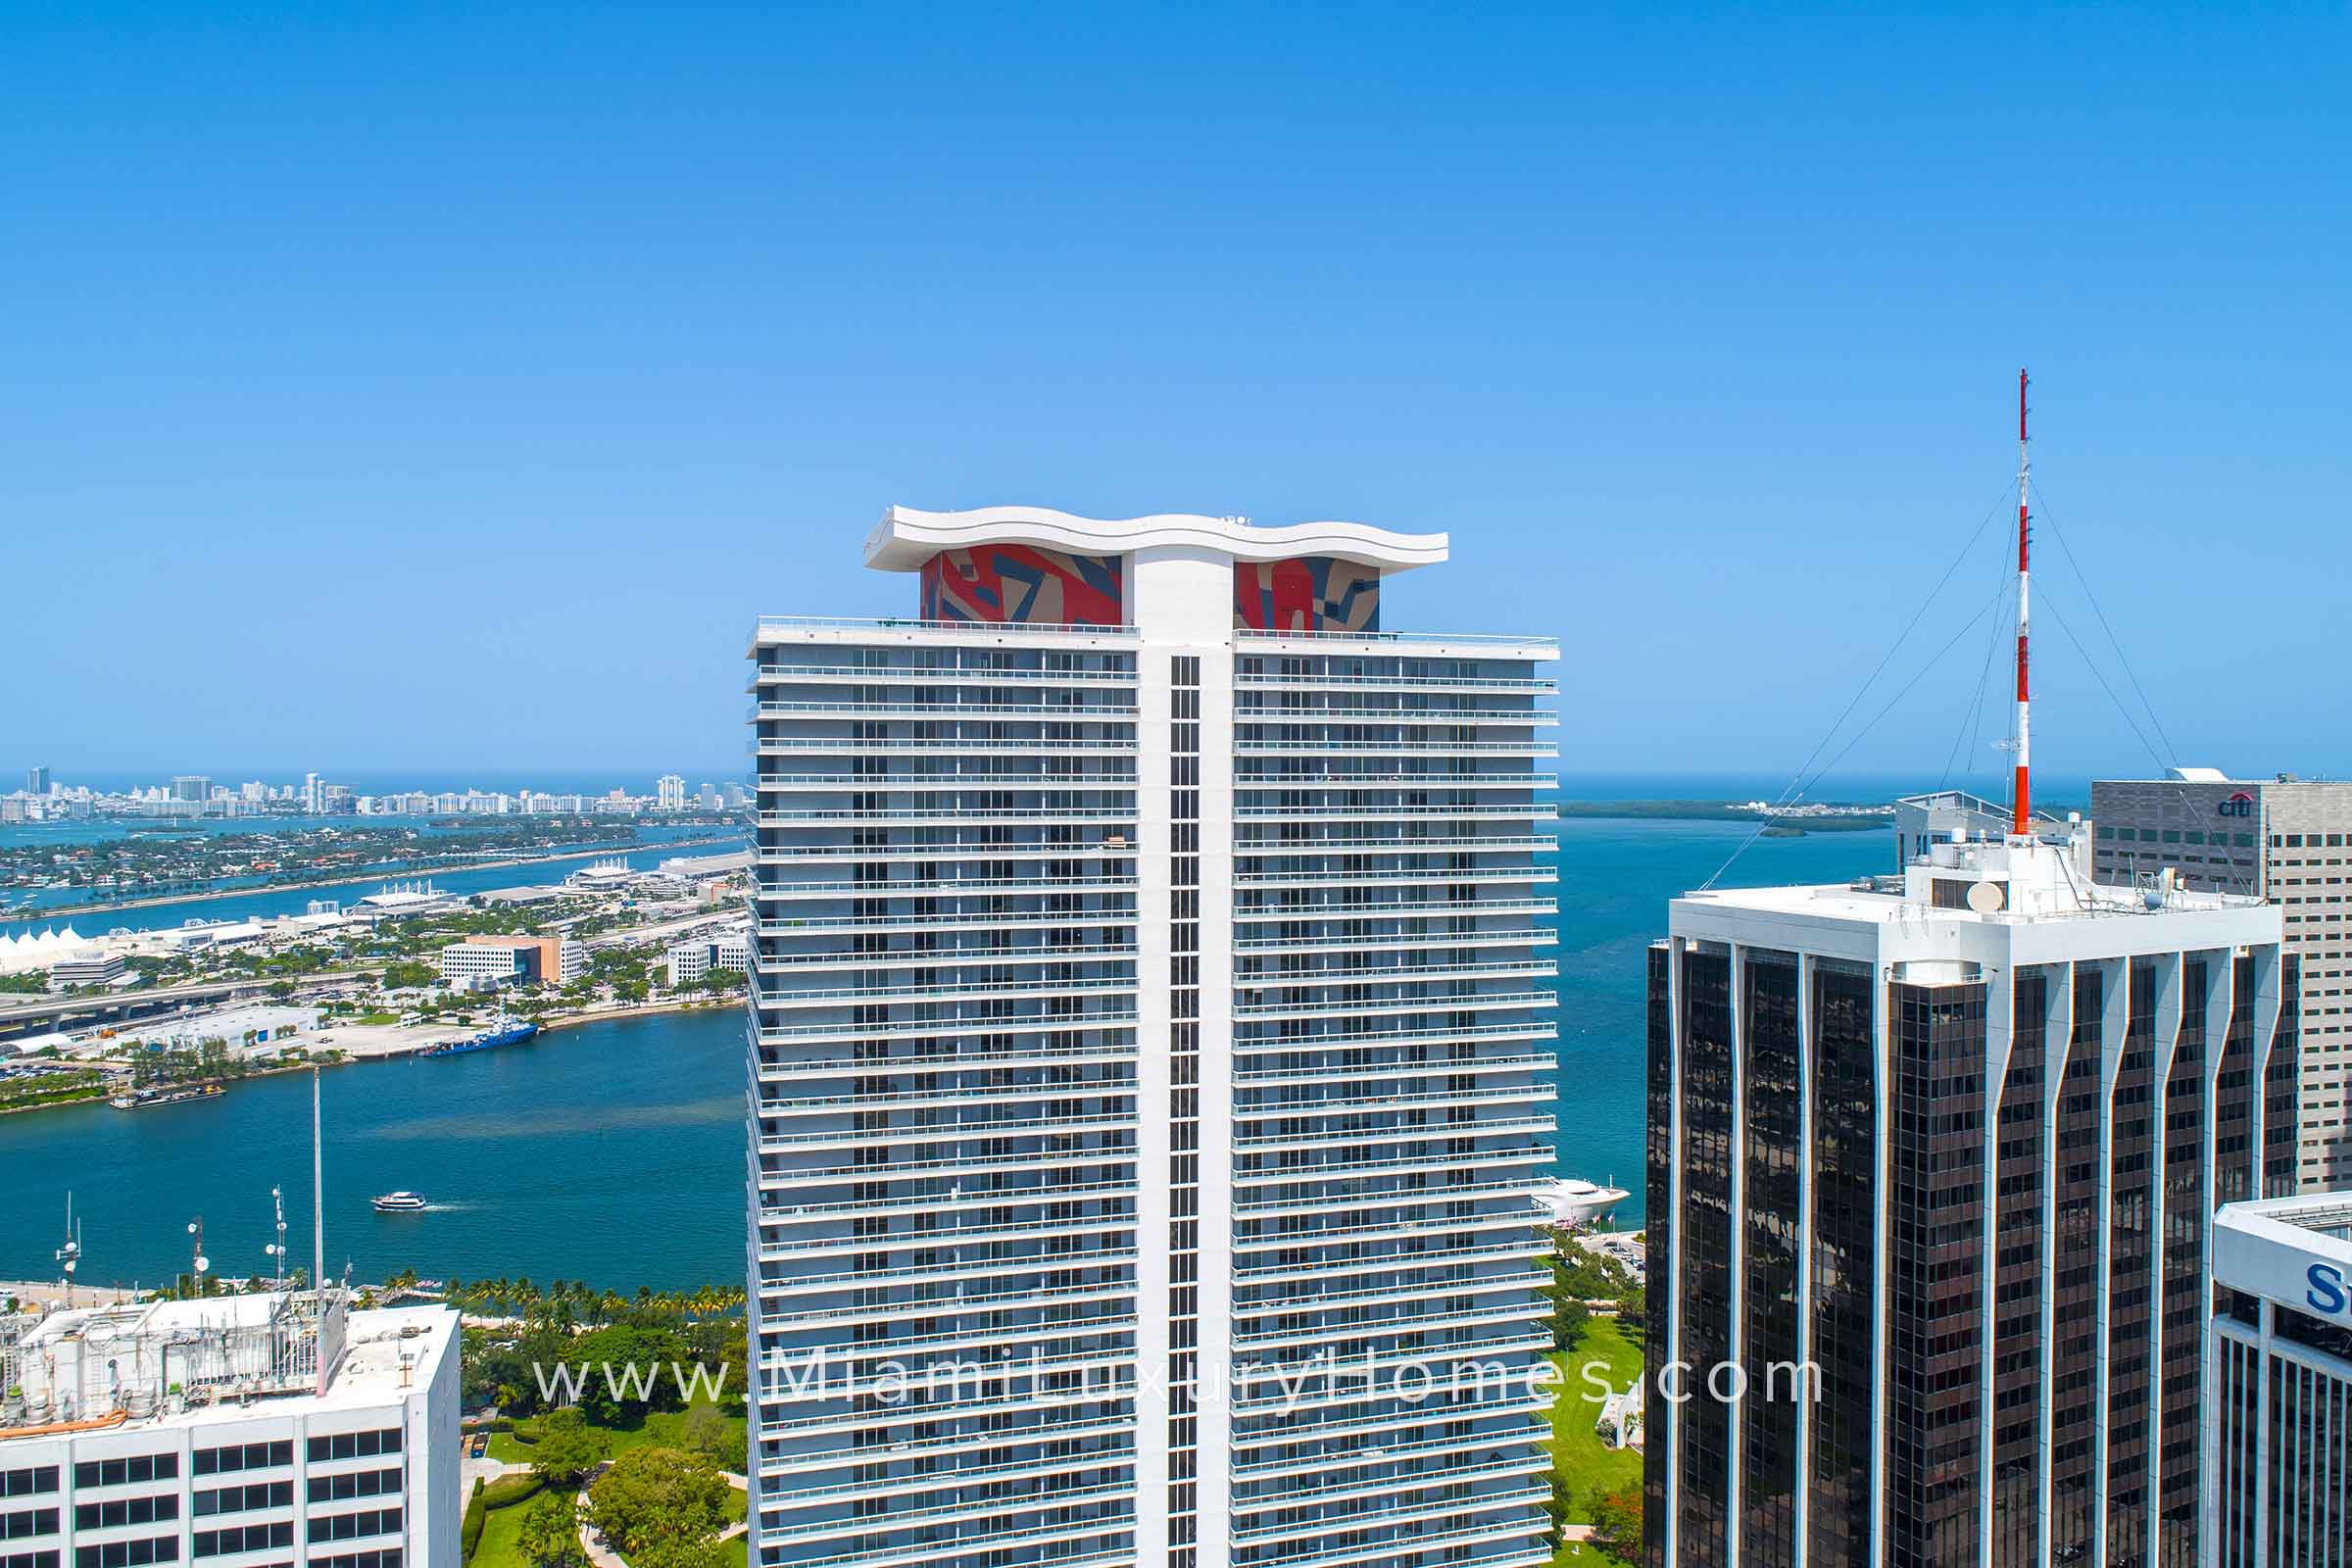 50 Biscayne Condos in Downtown Miami